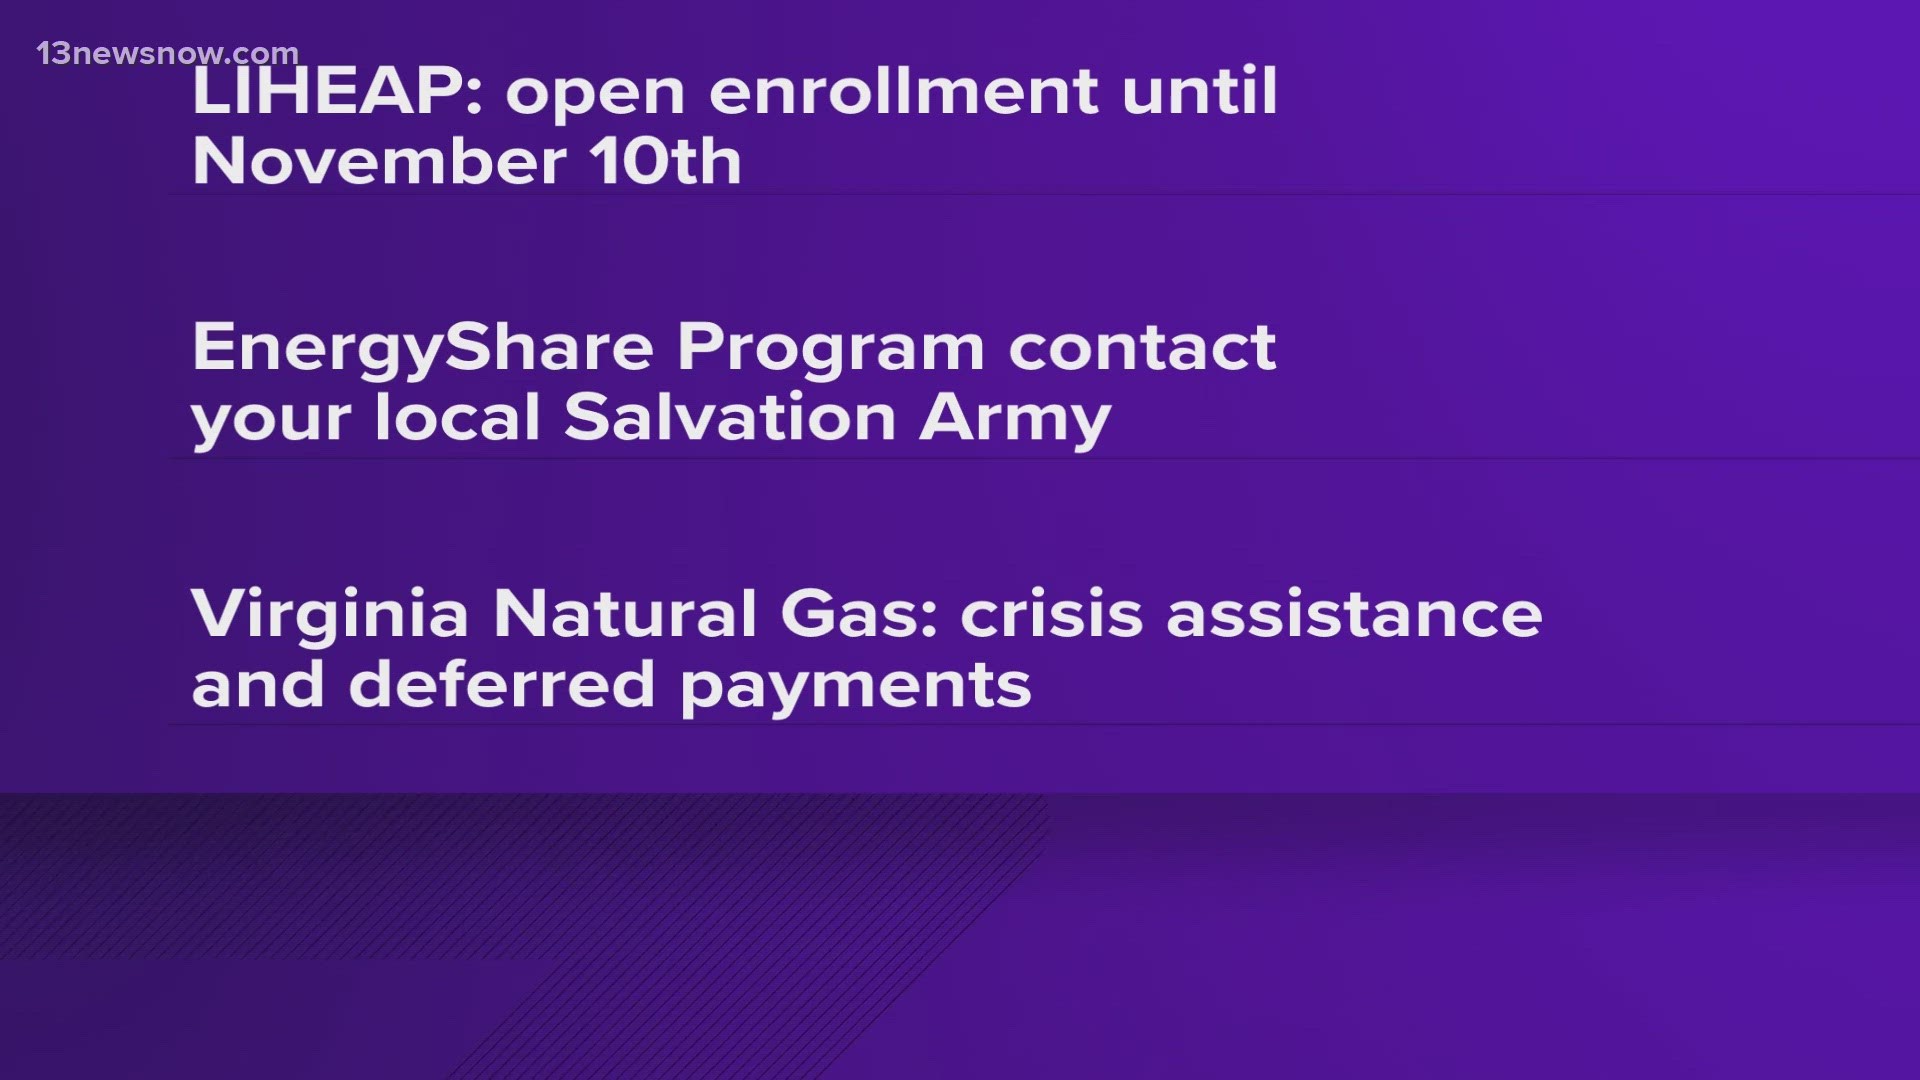 Households that use natural gas can apply for bill payment assistance programs to alleviate financial stress as colder weather approaches.